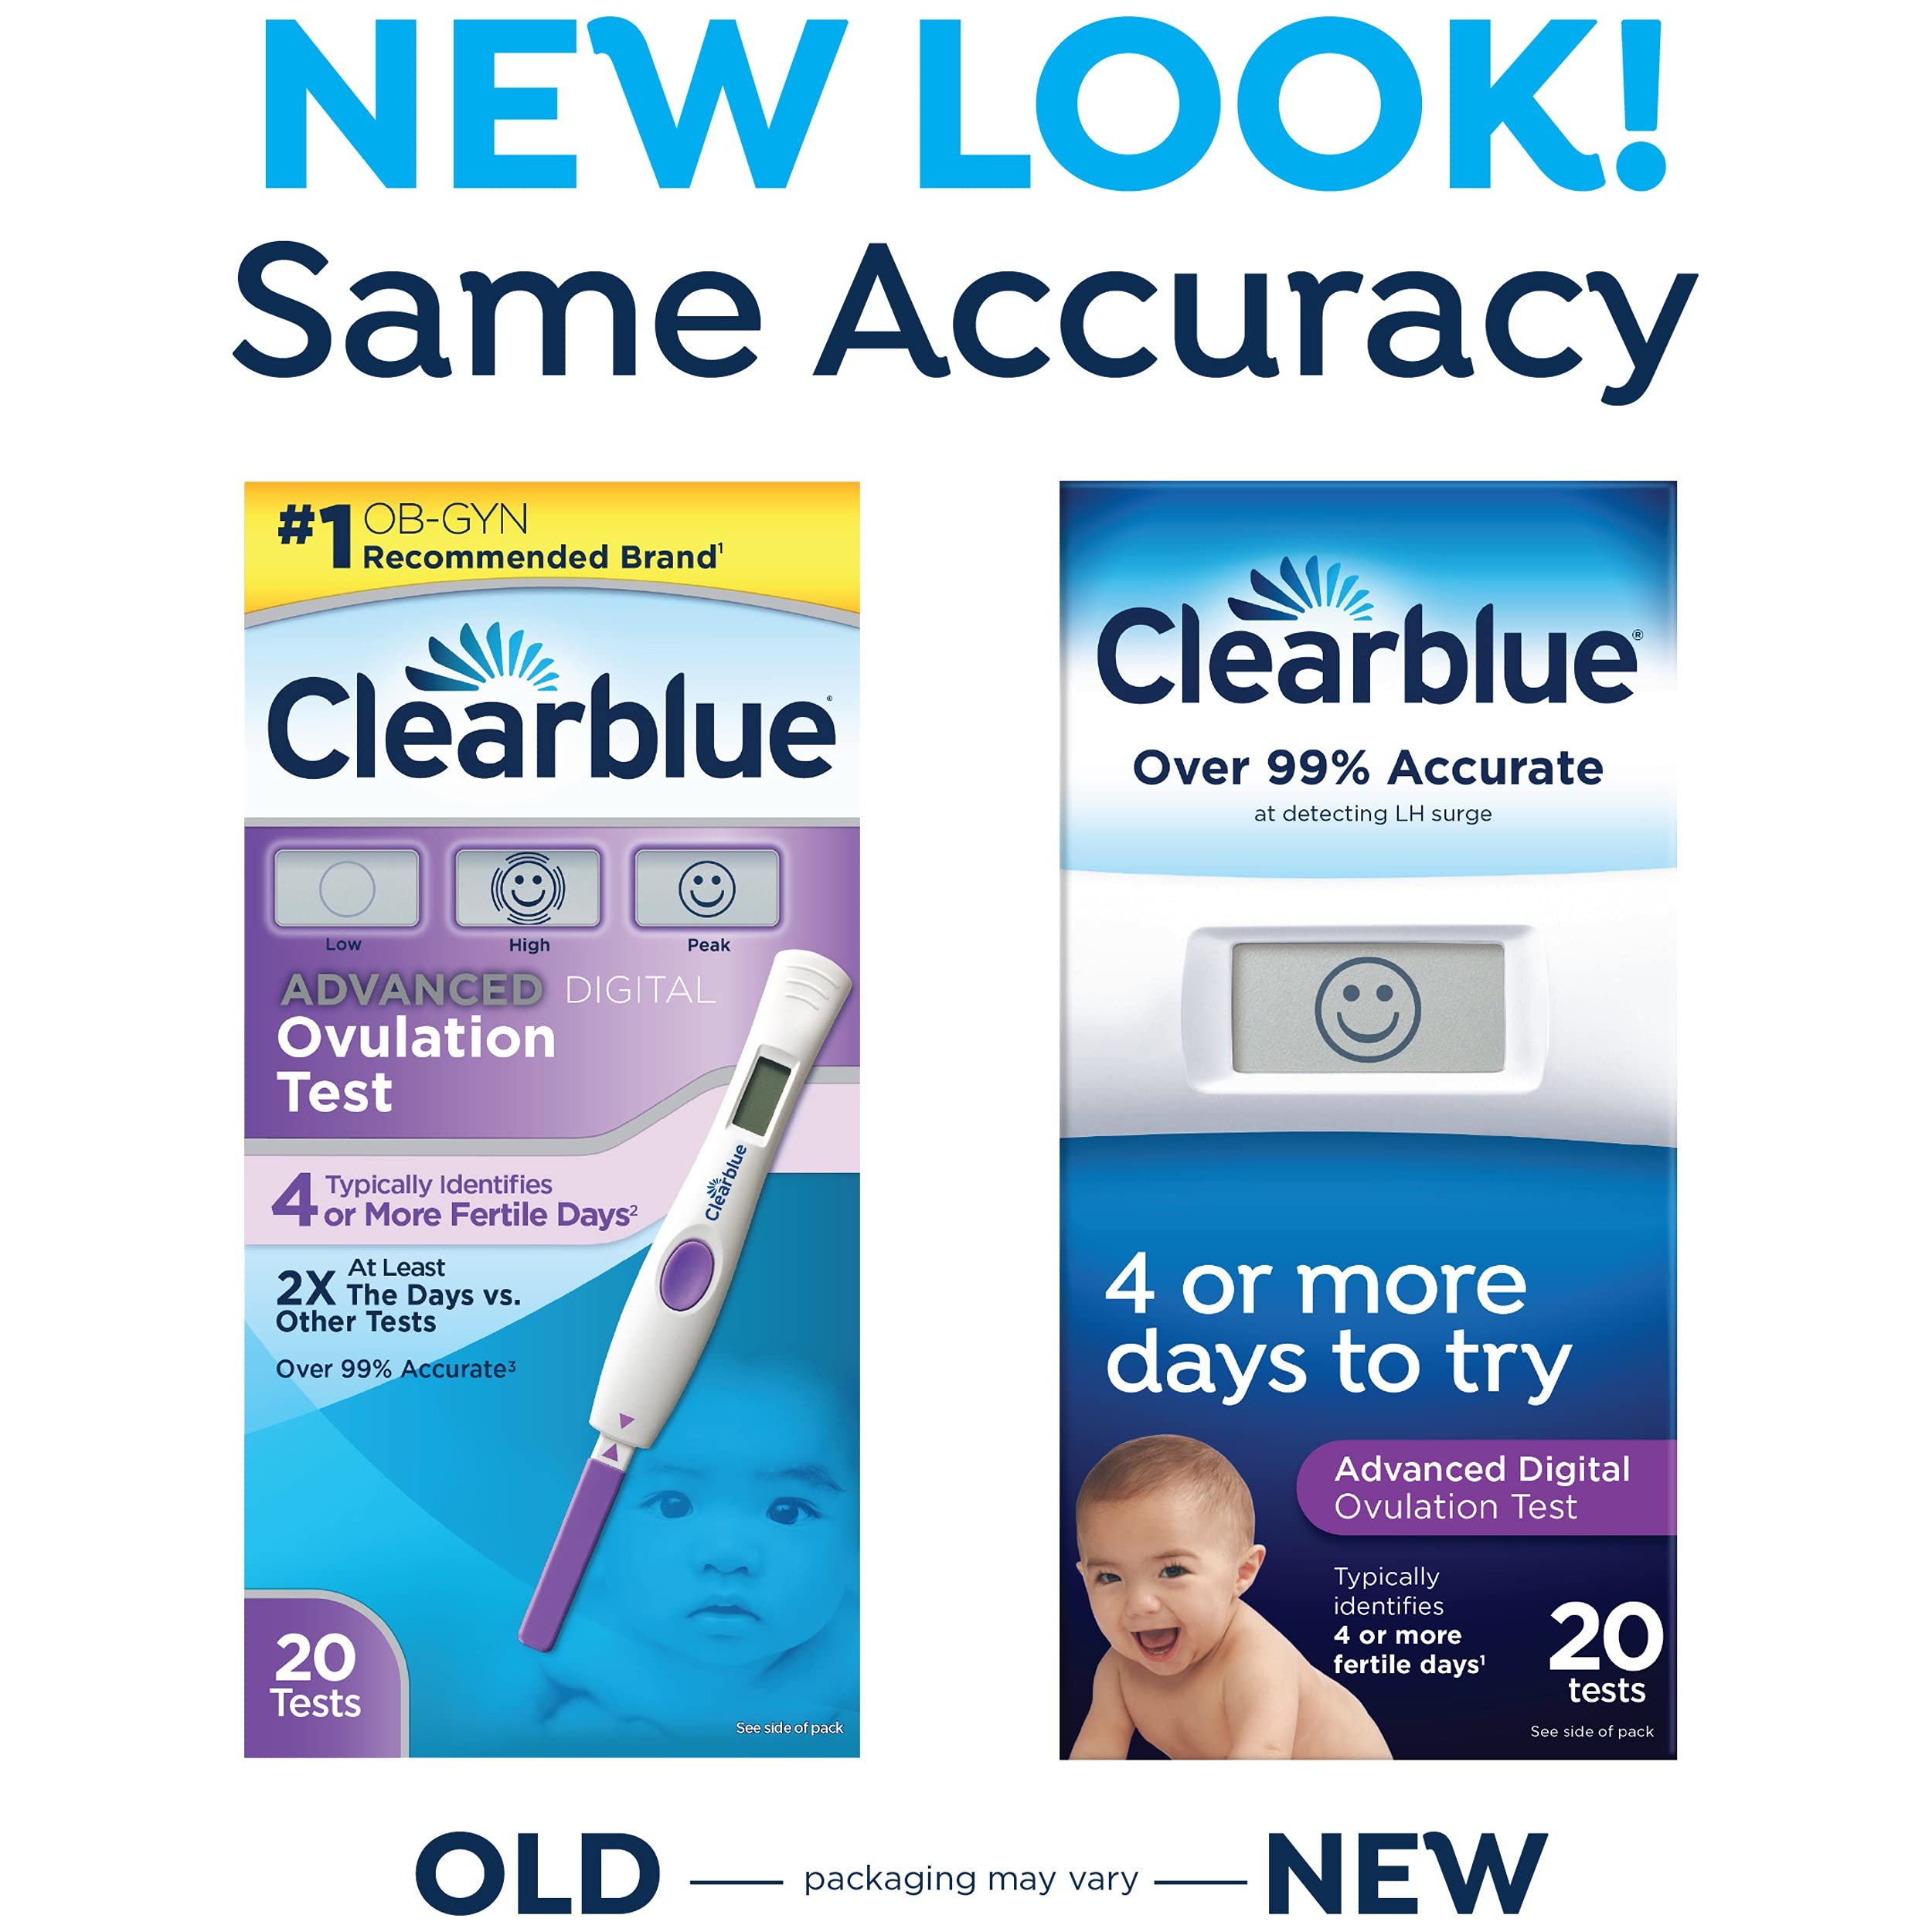 Clearblue Advanced Digital Ovulation Test, Predictor Kit, featuring Advanced Ovulation Tests with digital results, 20 ovulation tests